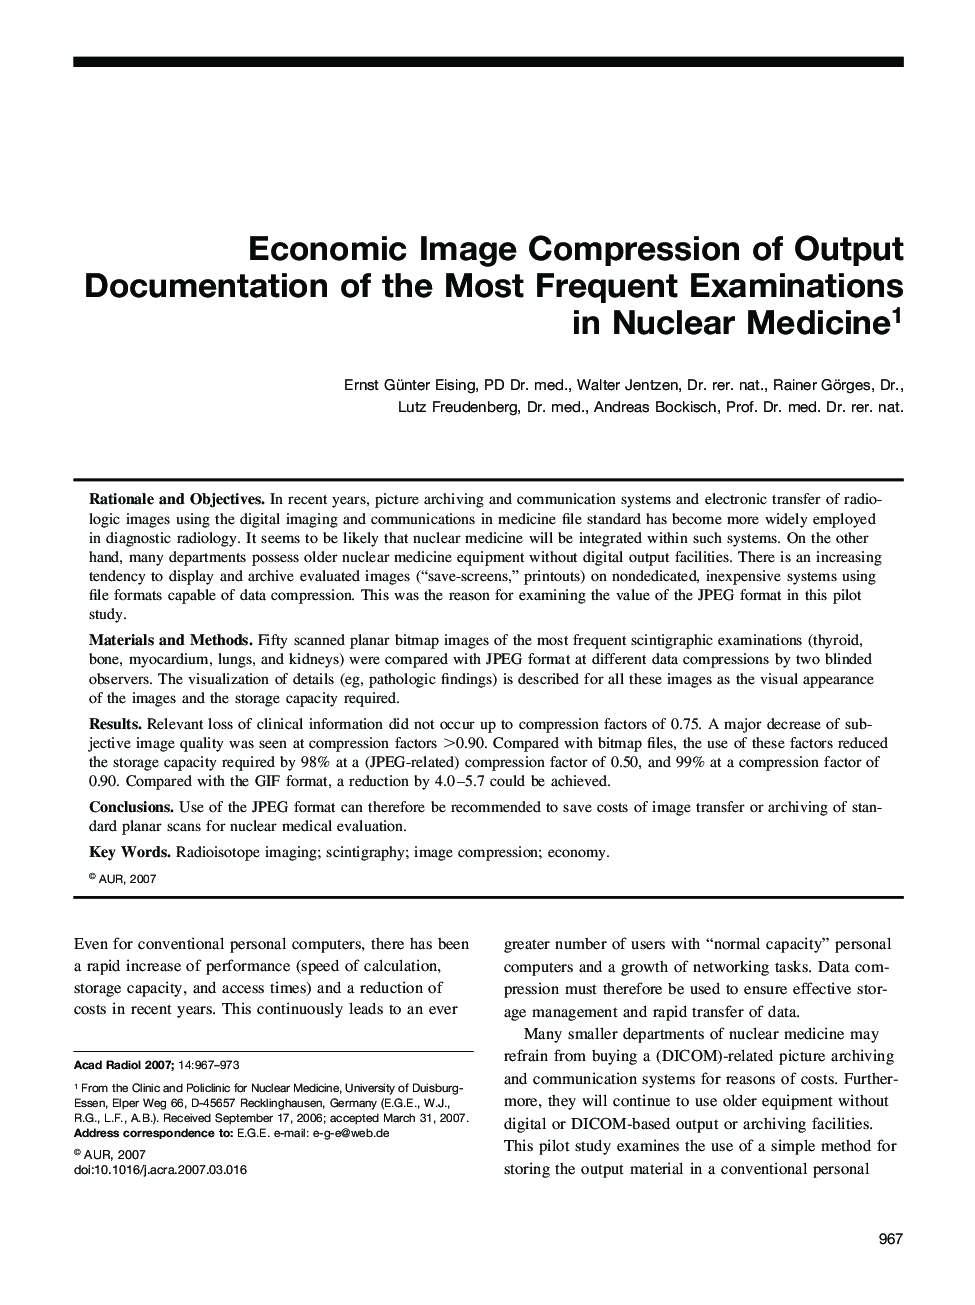 Economic Image Compression of Output Documentation of the Most Frequent Examinations in Nuclear Medicine